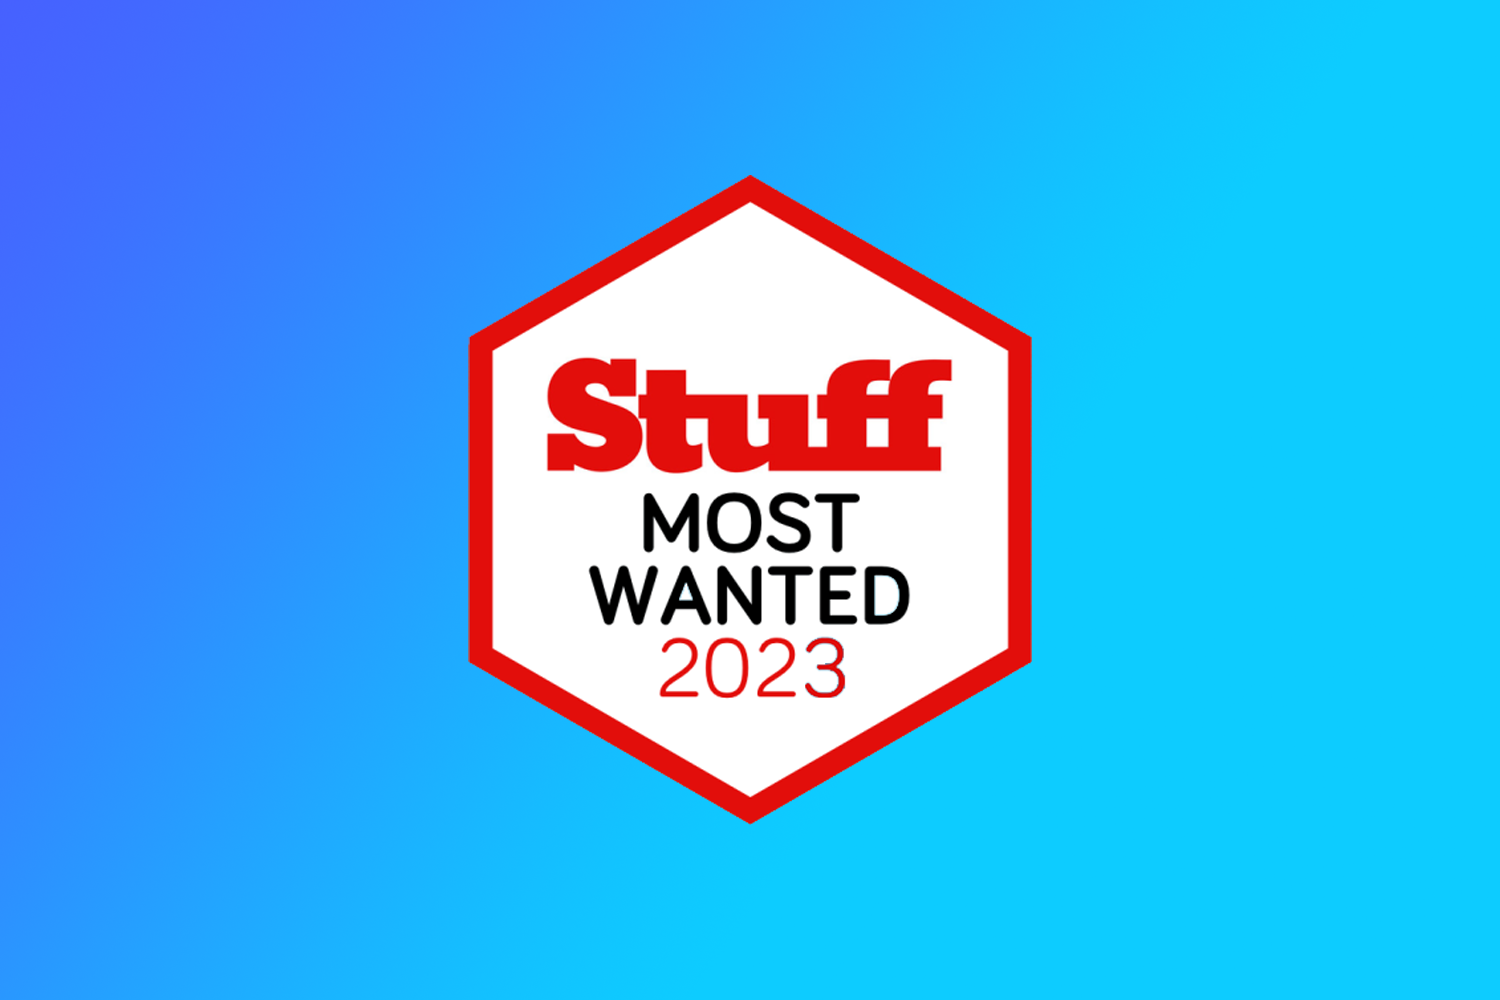 https://www.stuff.tv/wp-content/uploads/sites/2/2023/01/Stuff-CES-2023-Most-Wanted-Lead.png